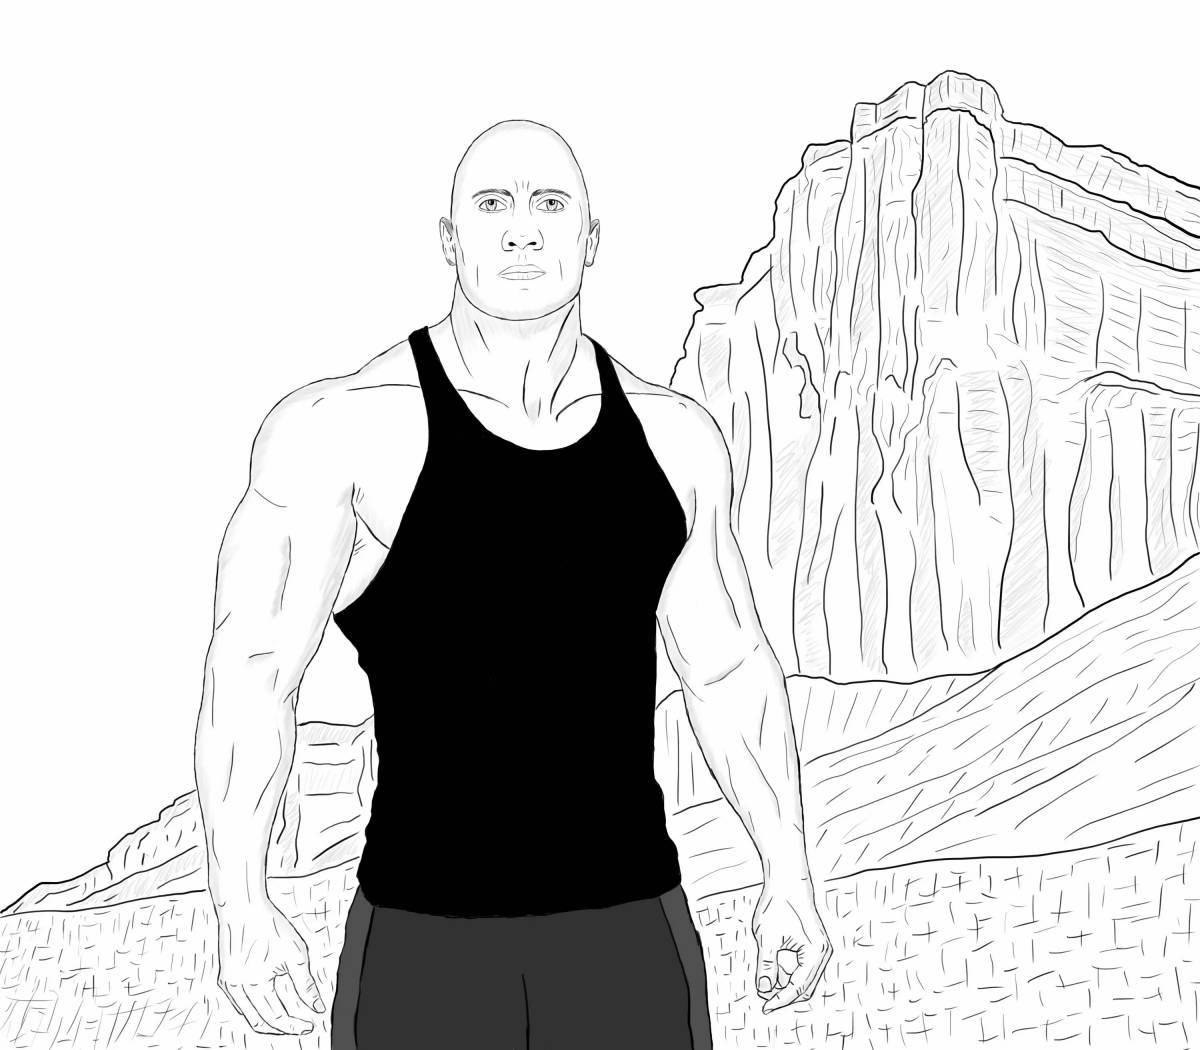 Dwayne Johnson's consolation coloring page